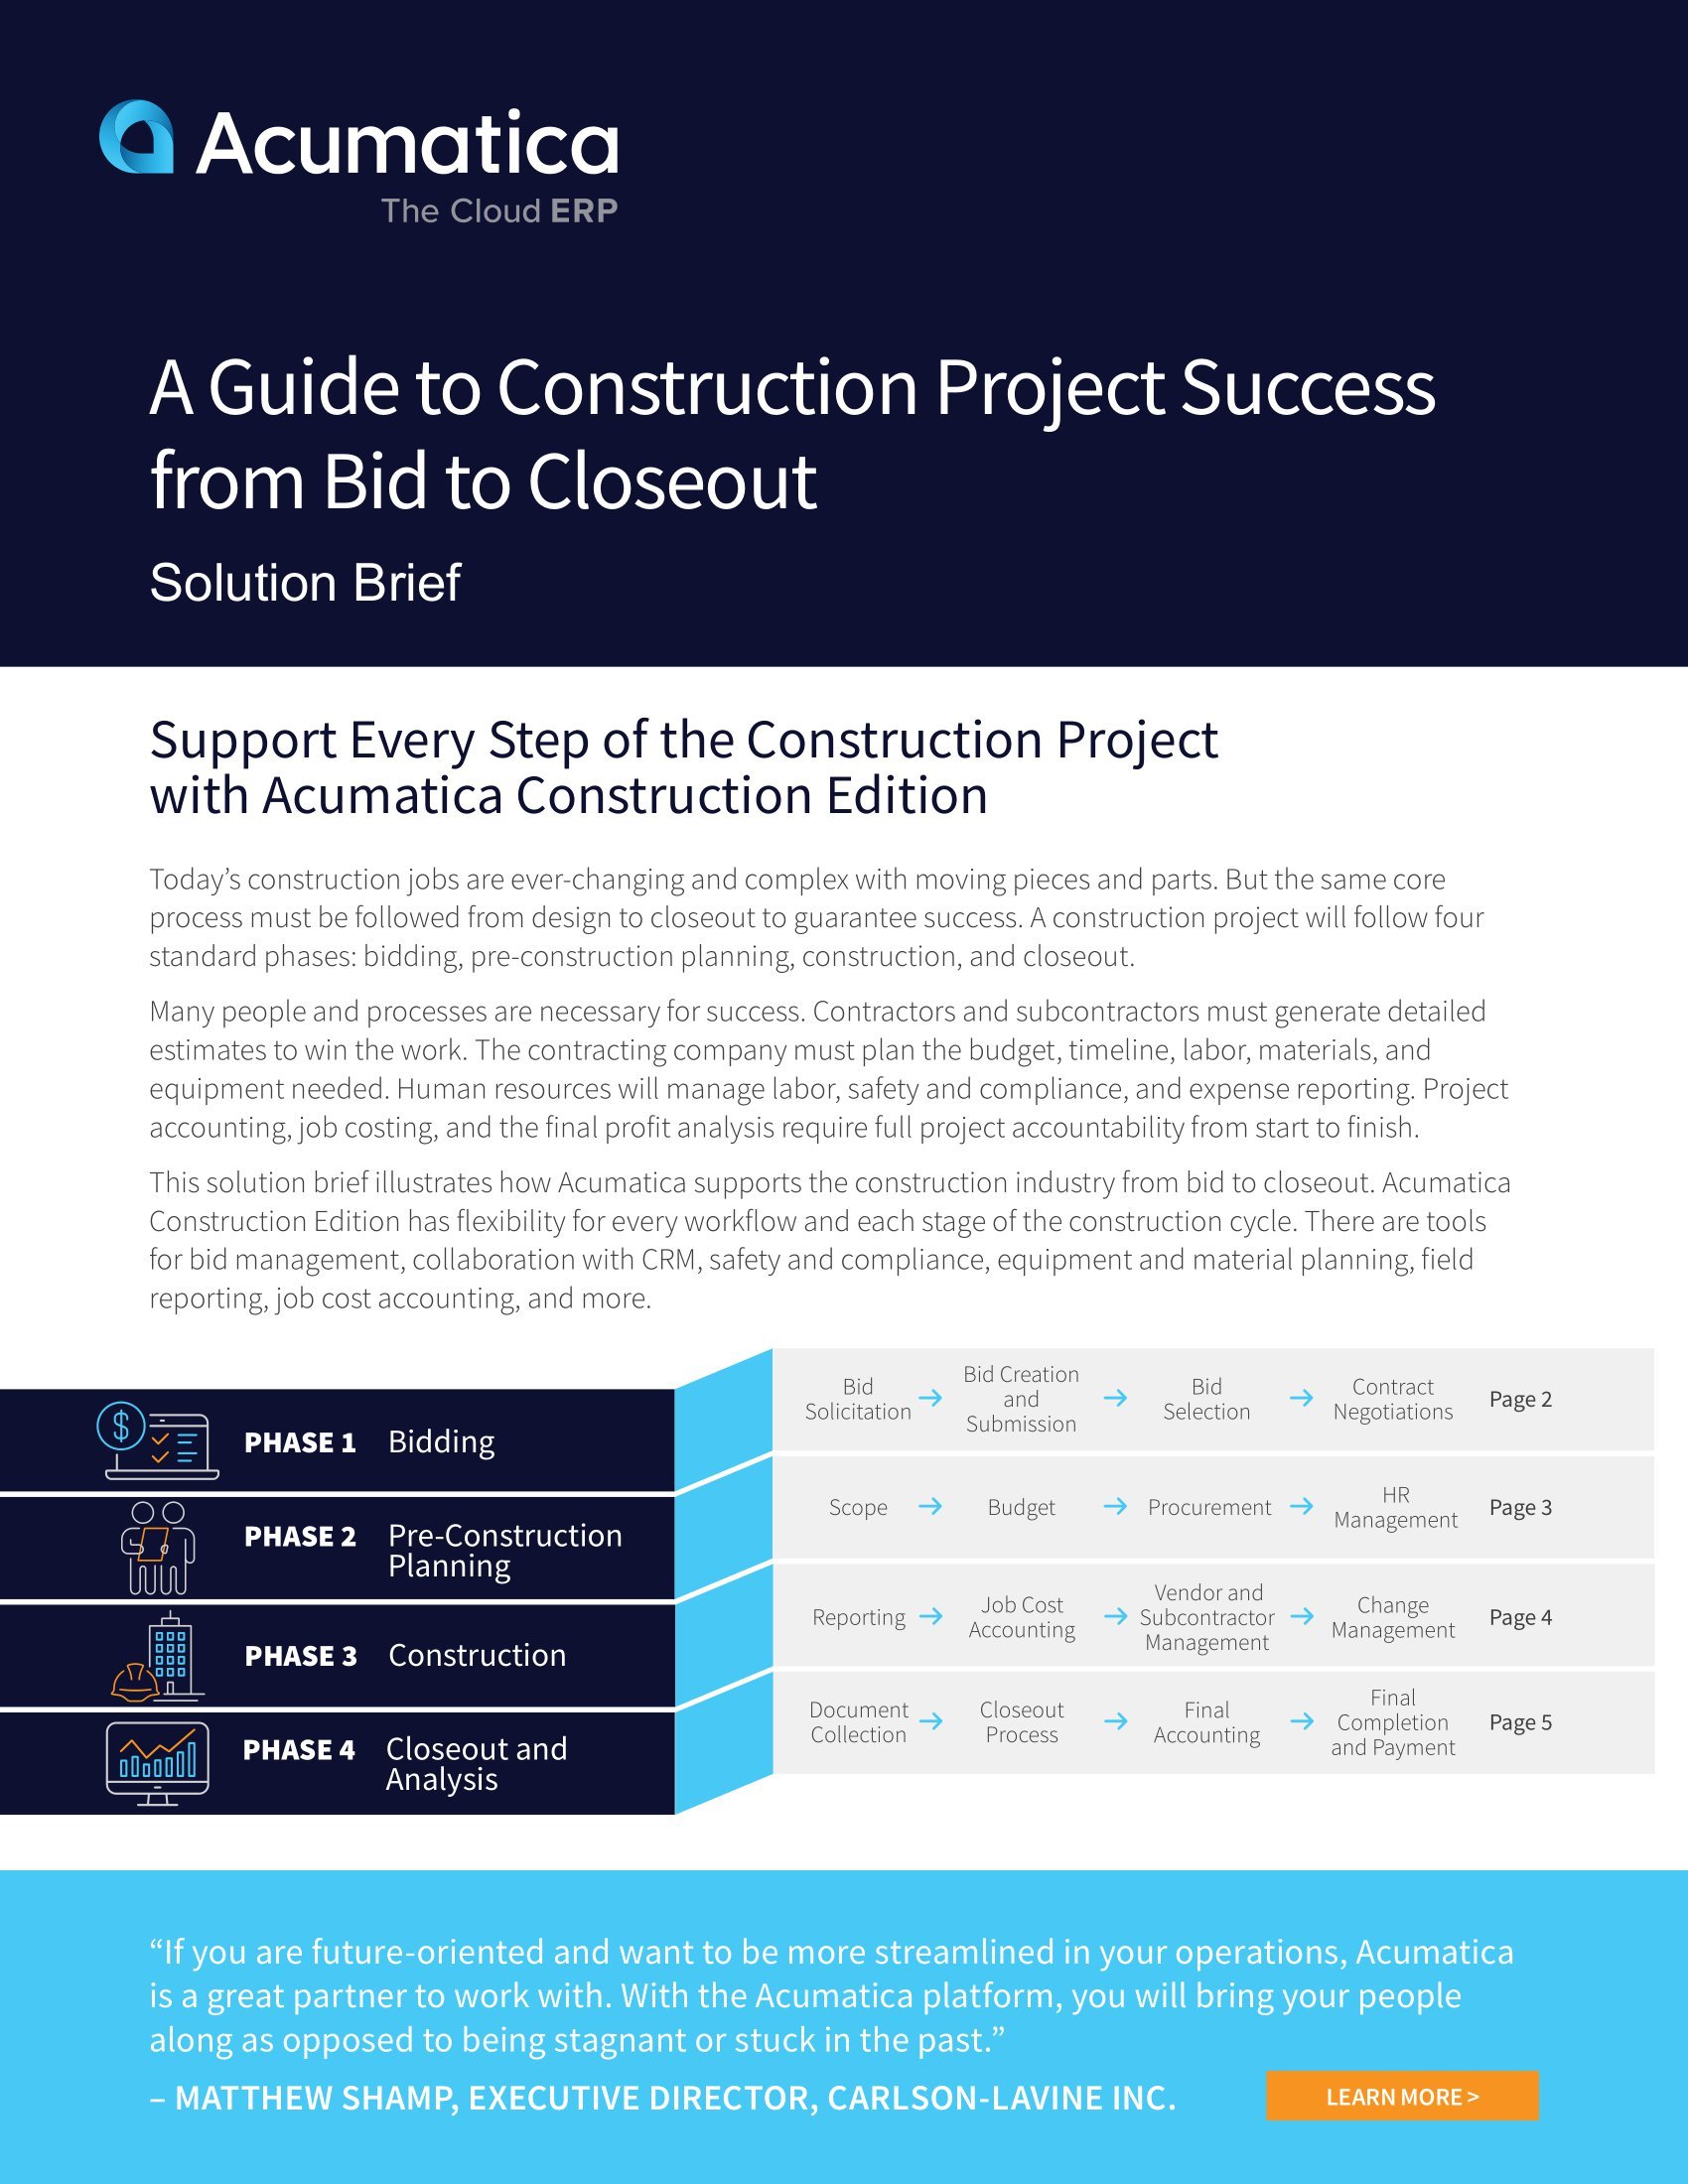 Discover Construction Bid to Closeout Cycle Ease with Acumatica 